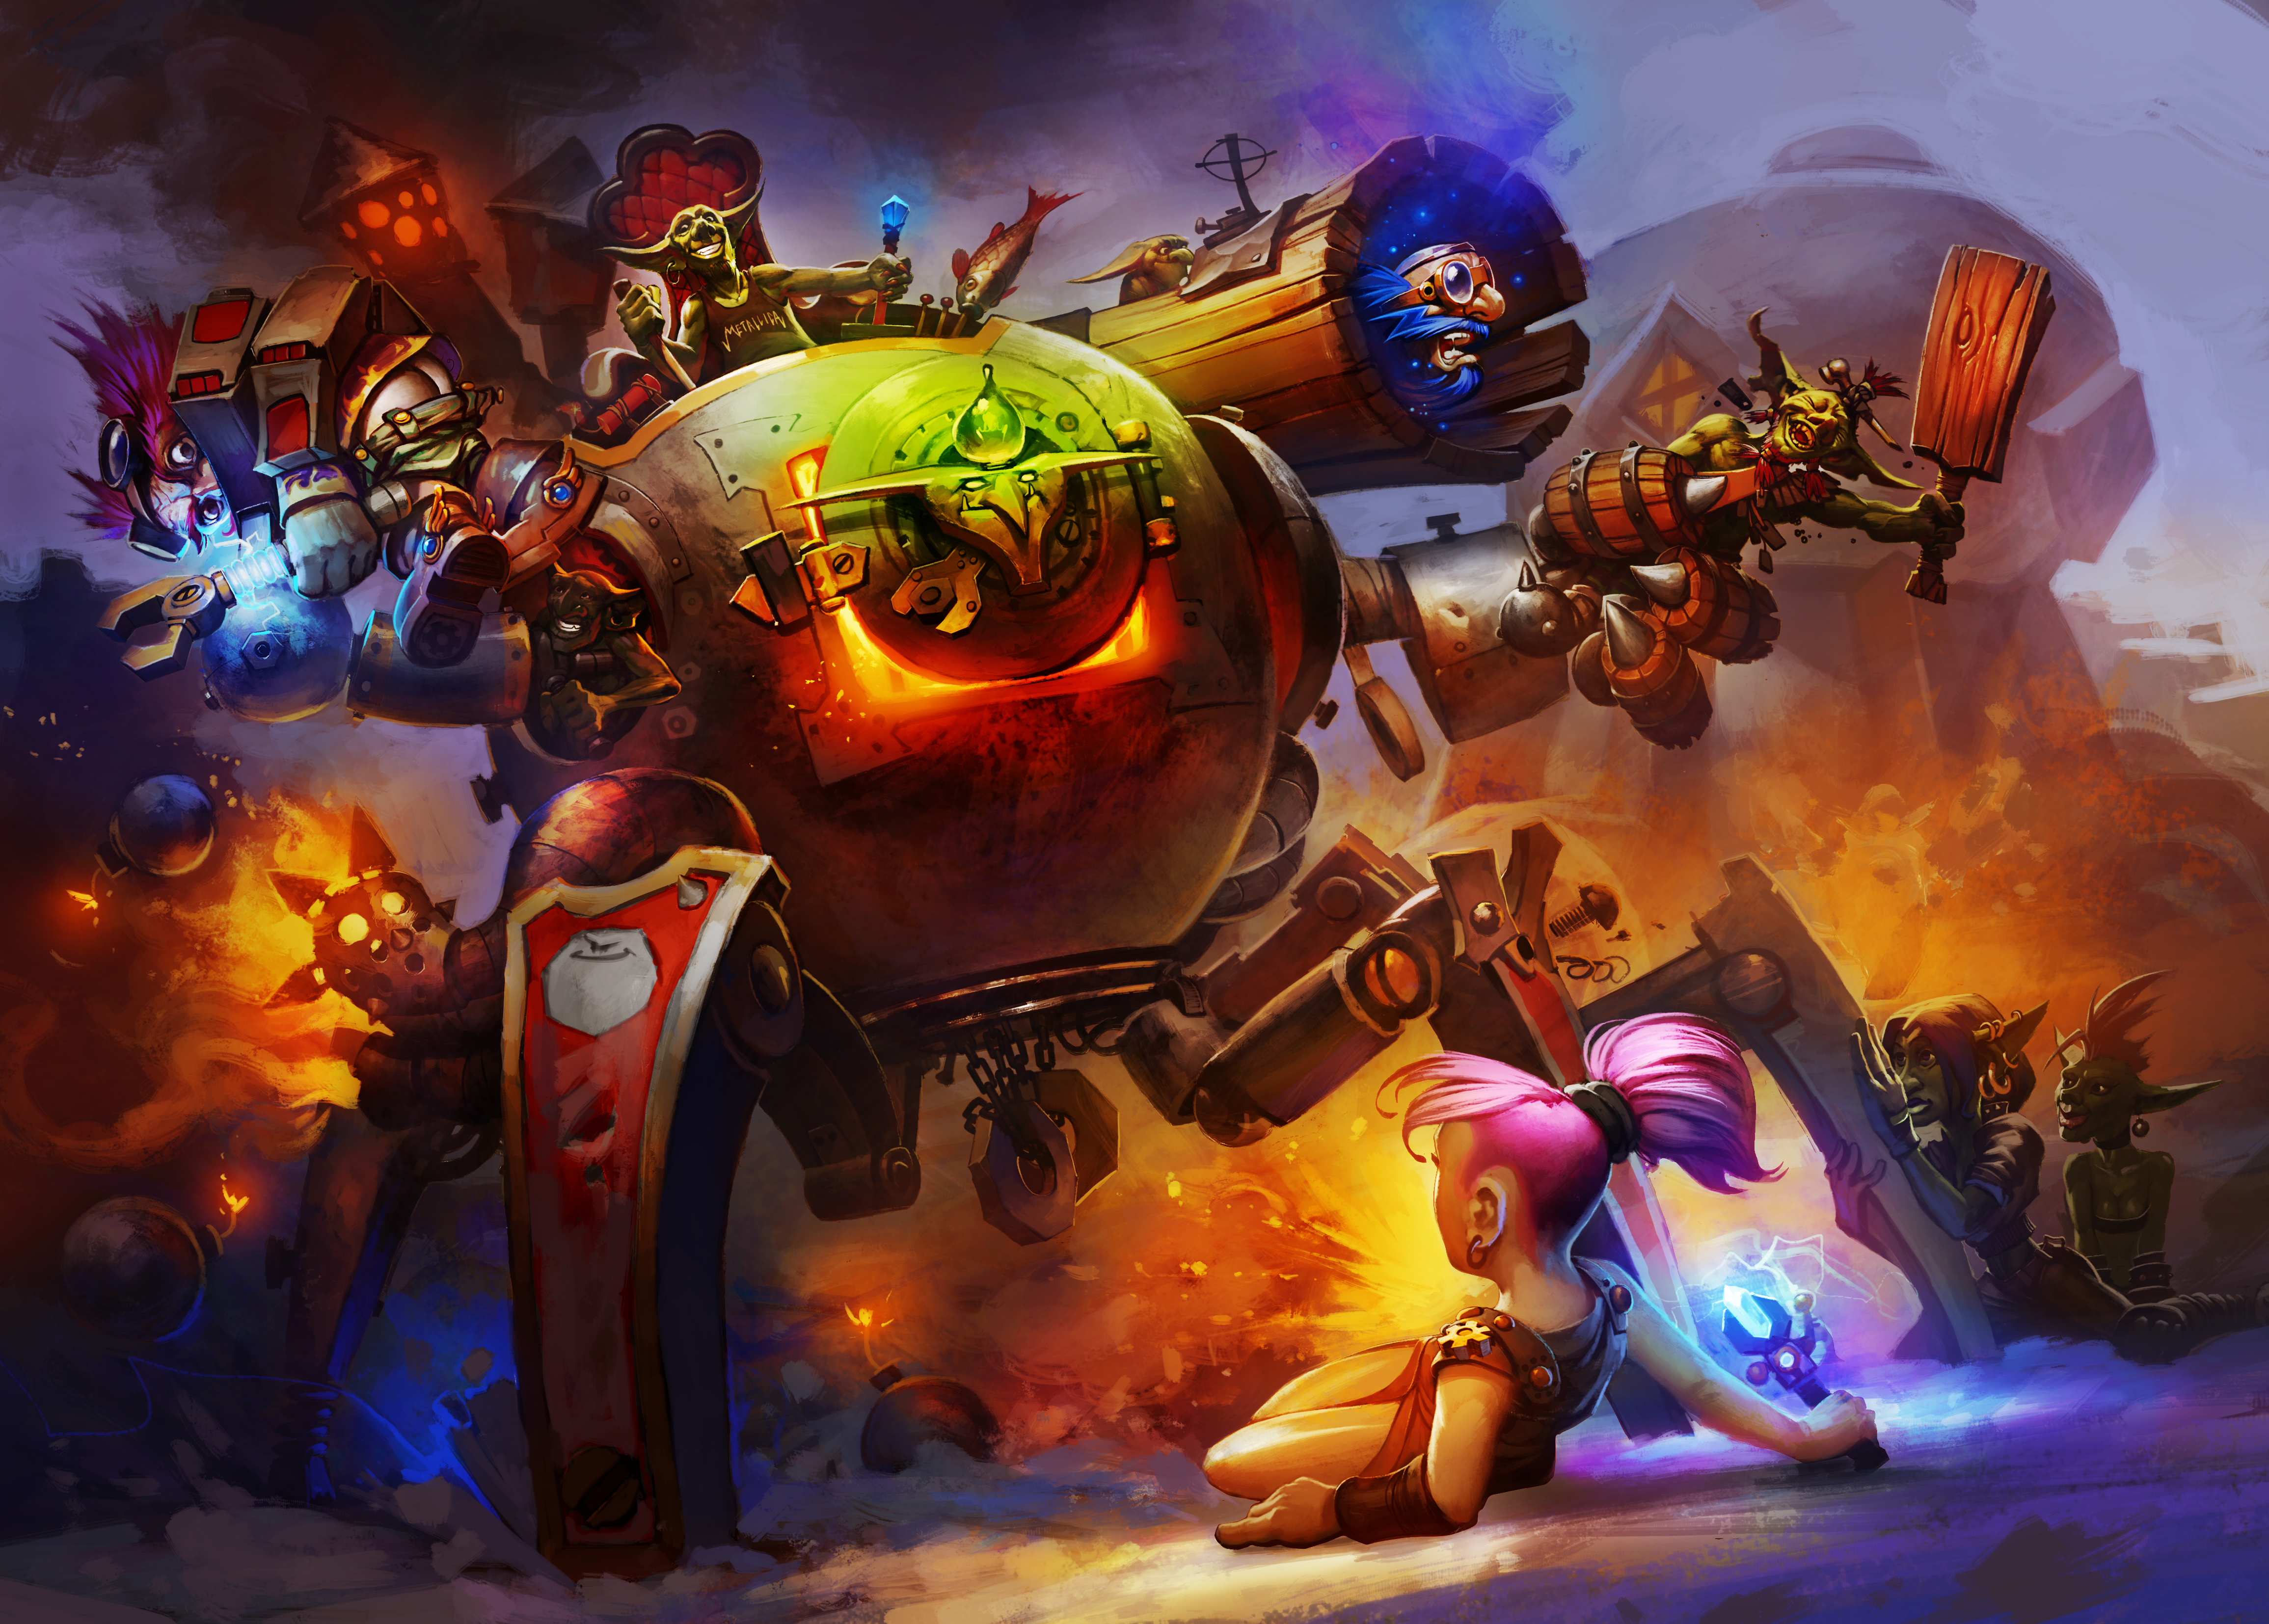 hearthstone wallpaper,action adventure game,strategy video game,games,pc game,adventure game